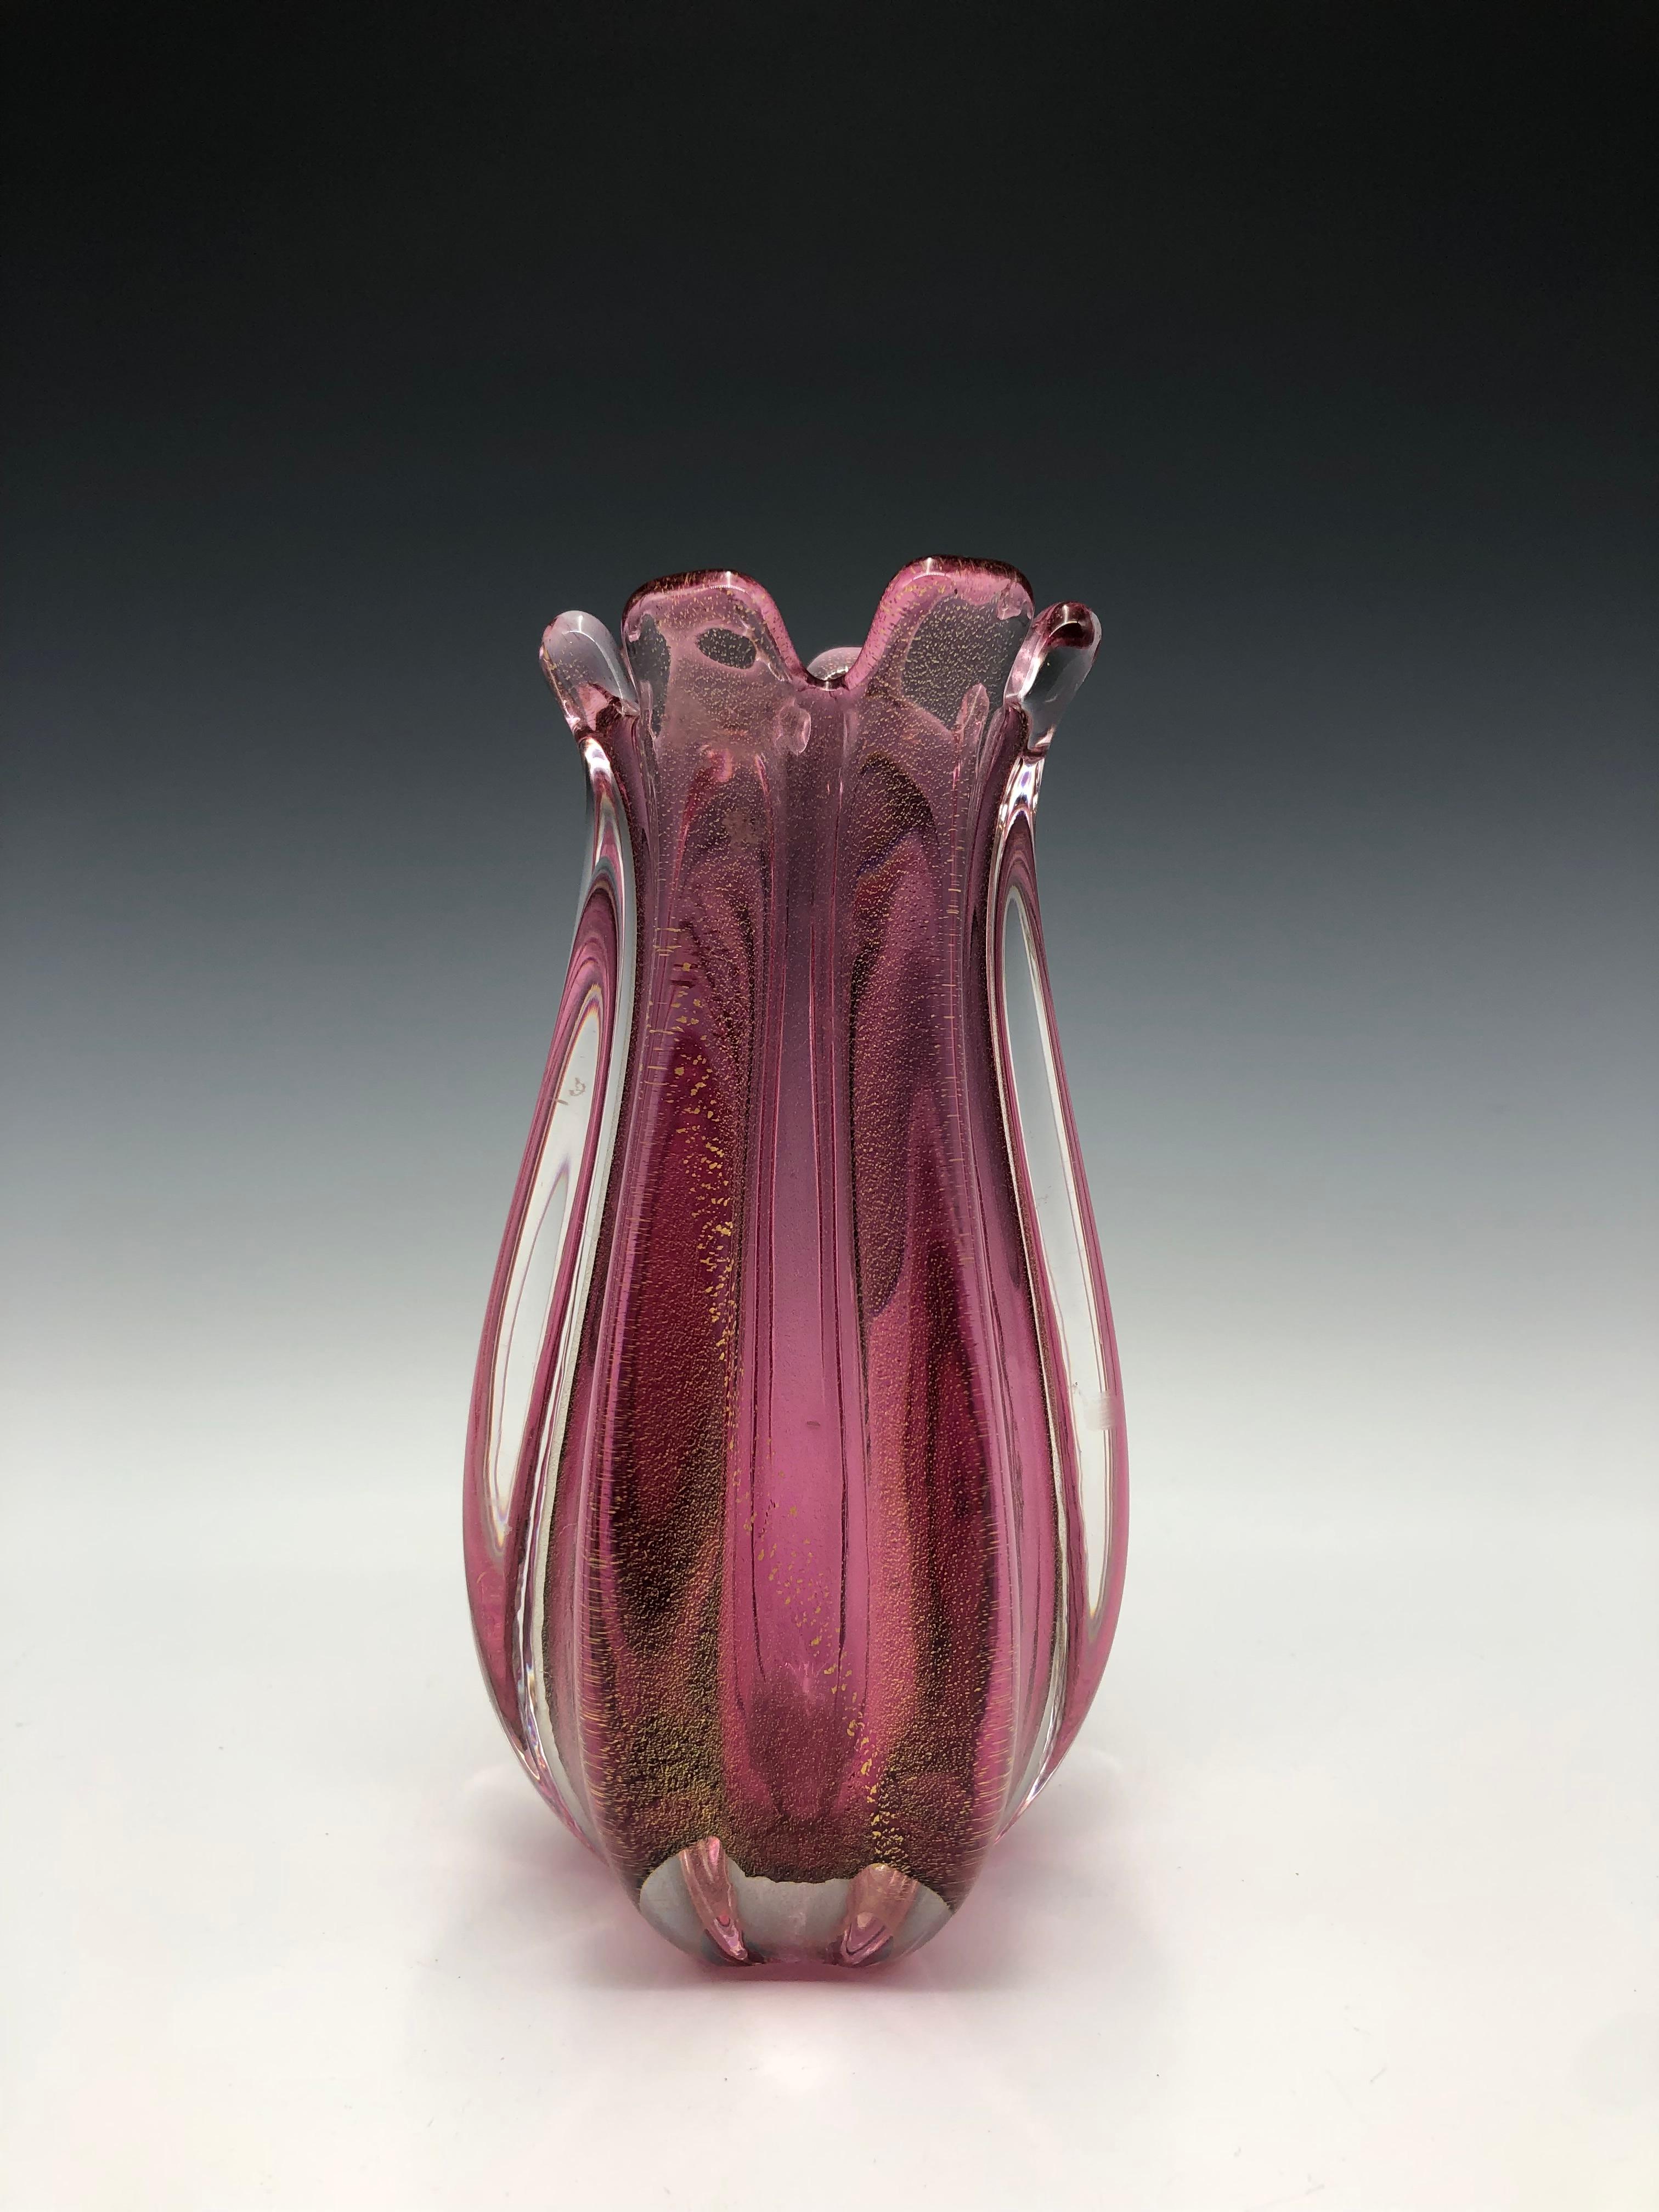 Stunning pink Murano ribbed gold-specked glass Sommerso bud vase created in a traditional workshop on Murano island using a rare gold leaf technique. 24K gold leaf is infused into cristallo glass under high temperatures inside special glass-making